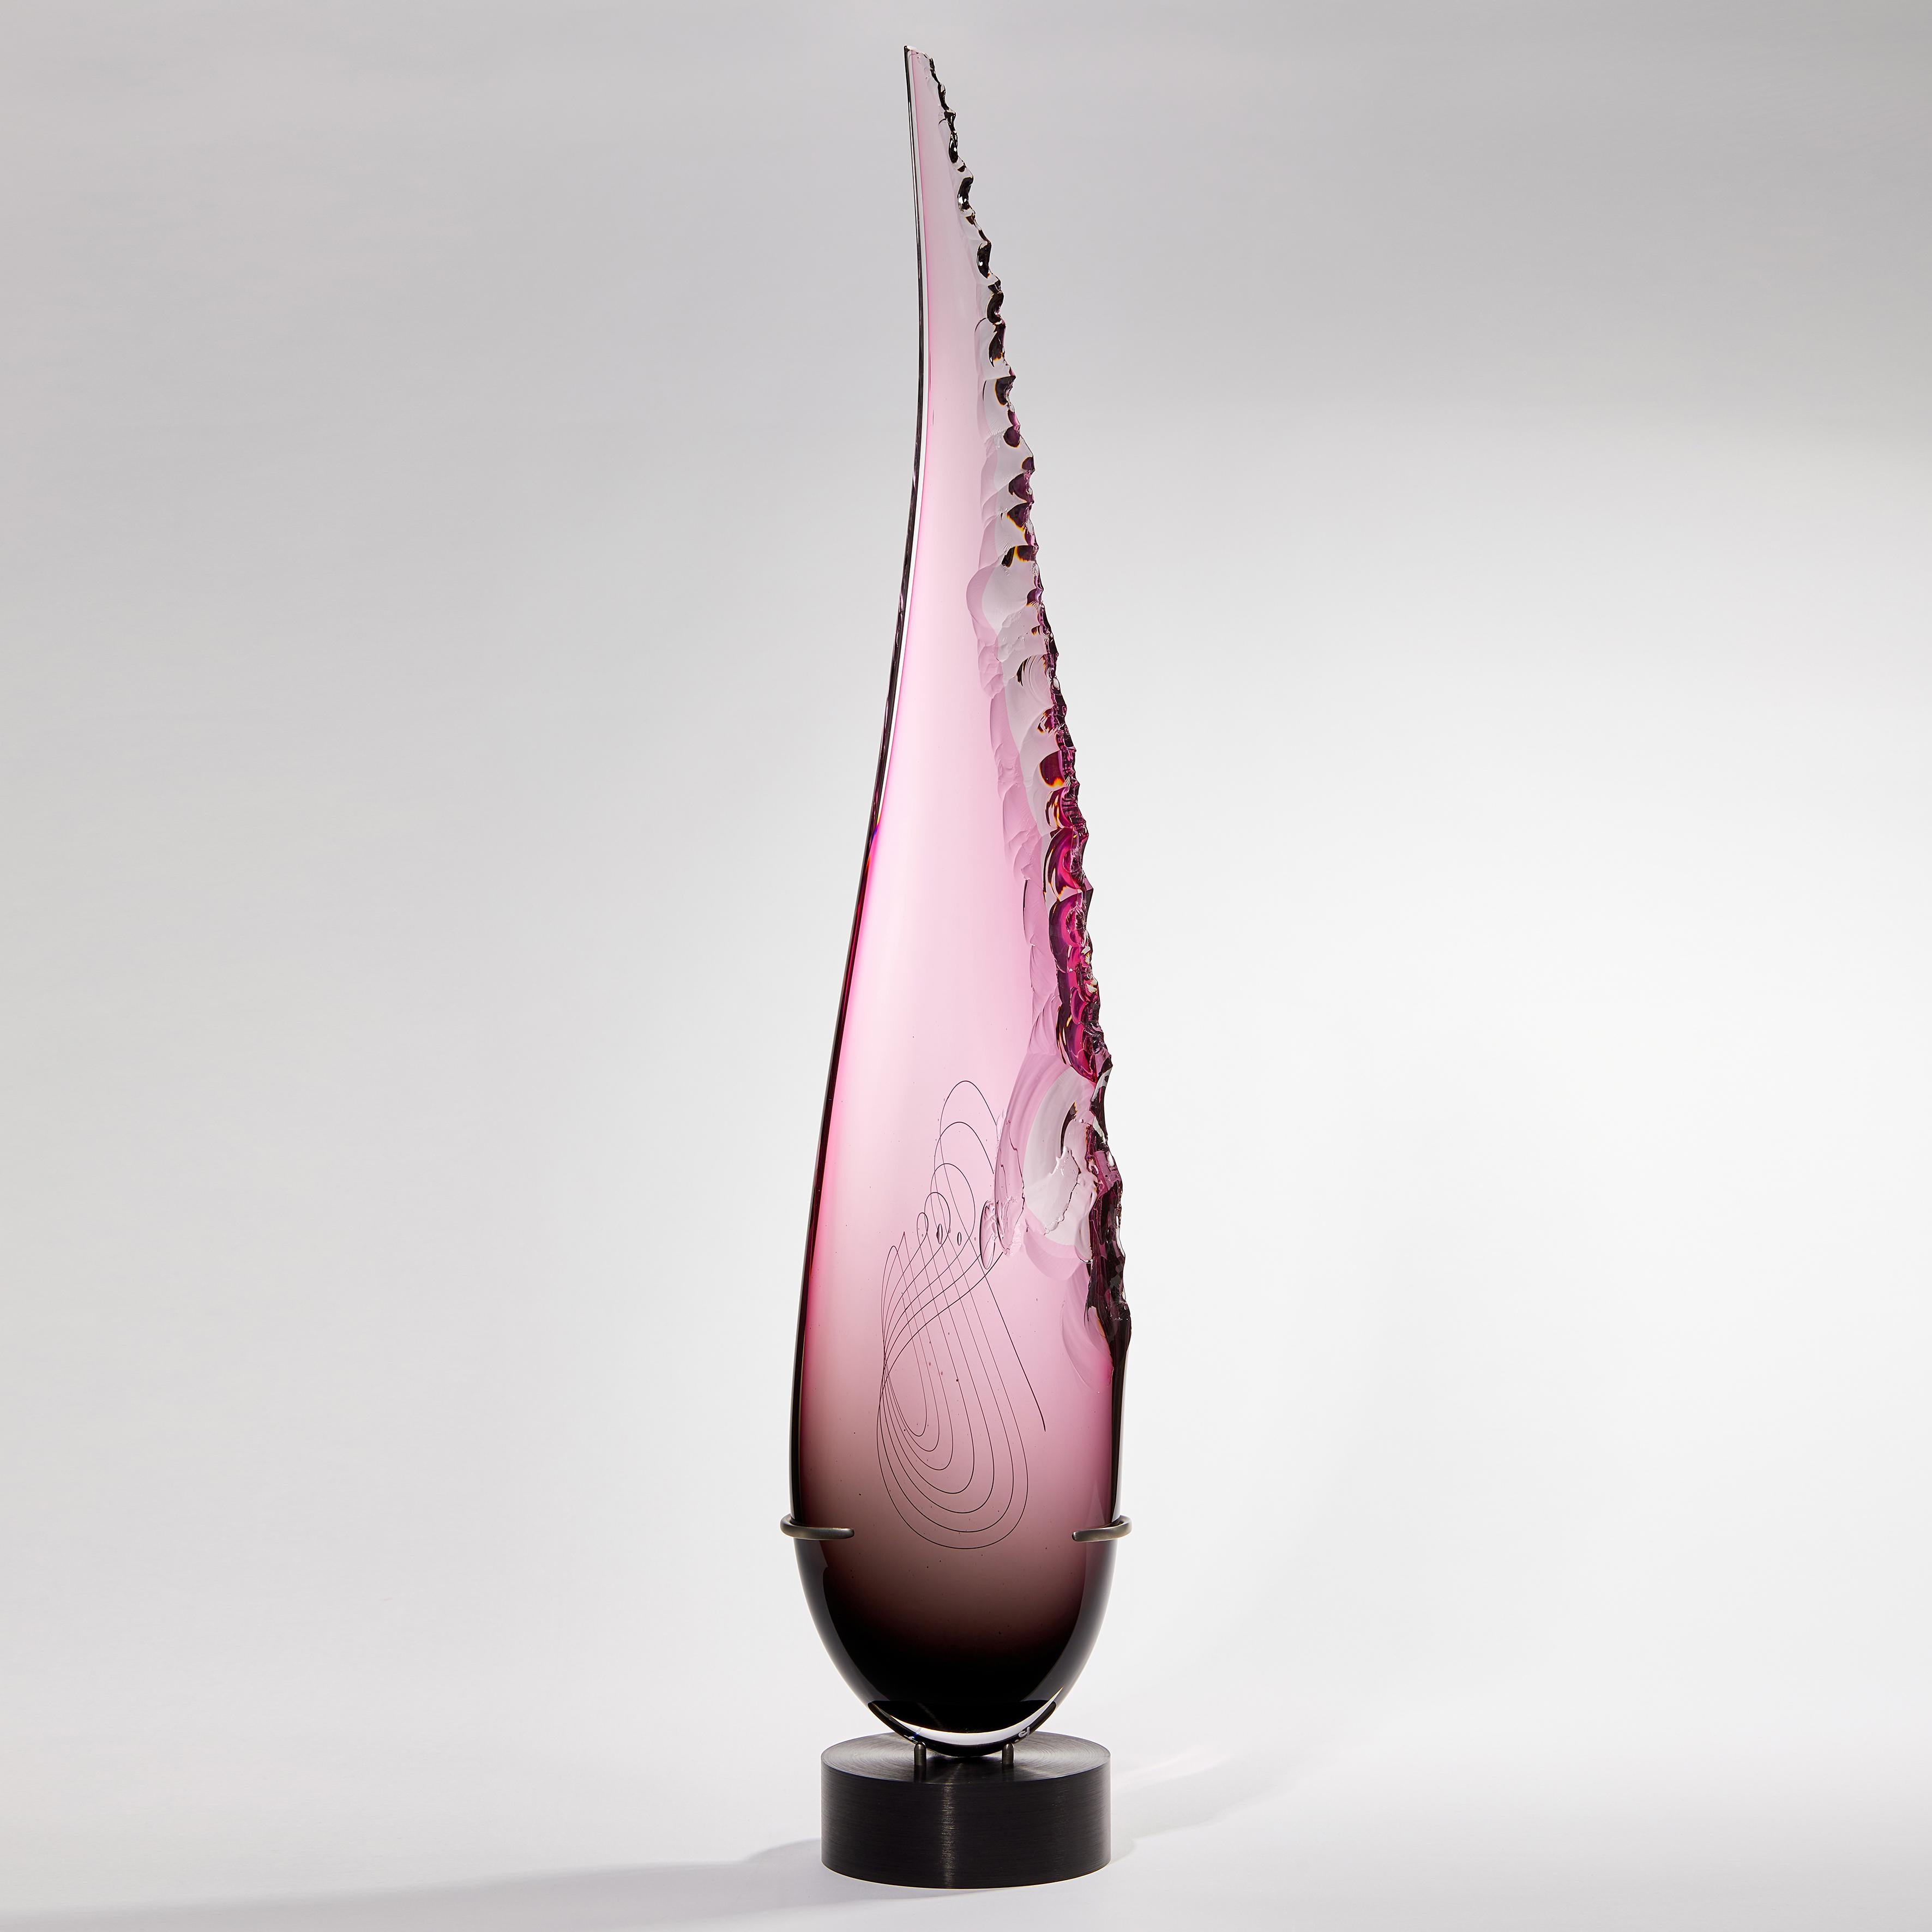 'Clovis in Grey to Ruby' is a unique tall glass sculpture by the British artist James Devereux.

Refinement and daring combine within this statuesque sculpture. Poised upon a museum-quality patinated steel base, the eye is drawn upwards, taken by